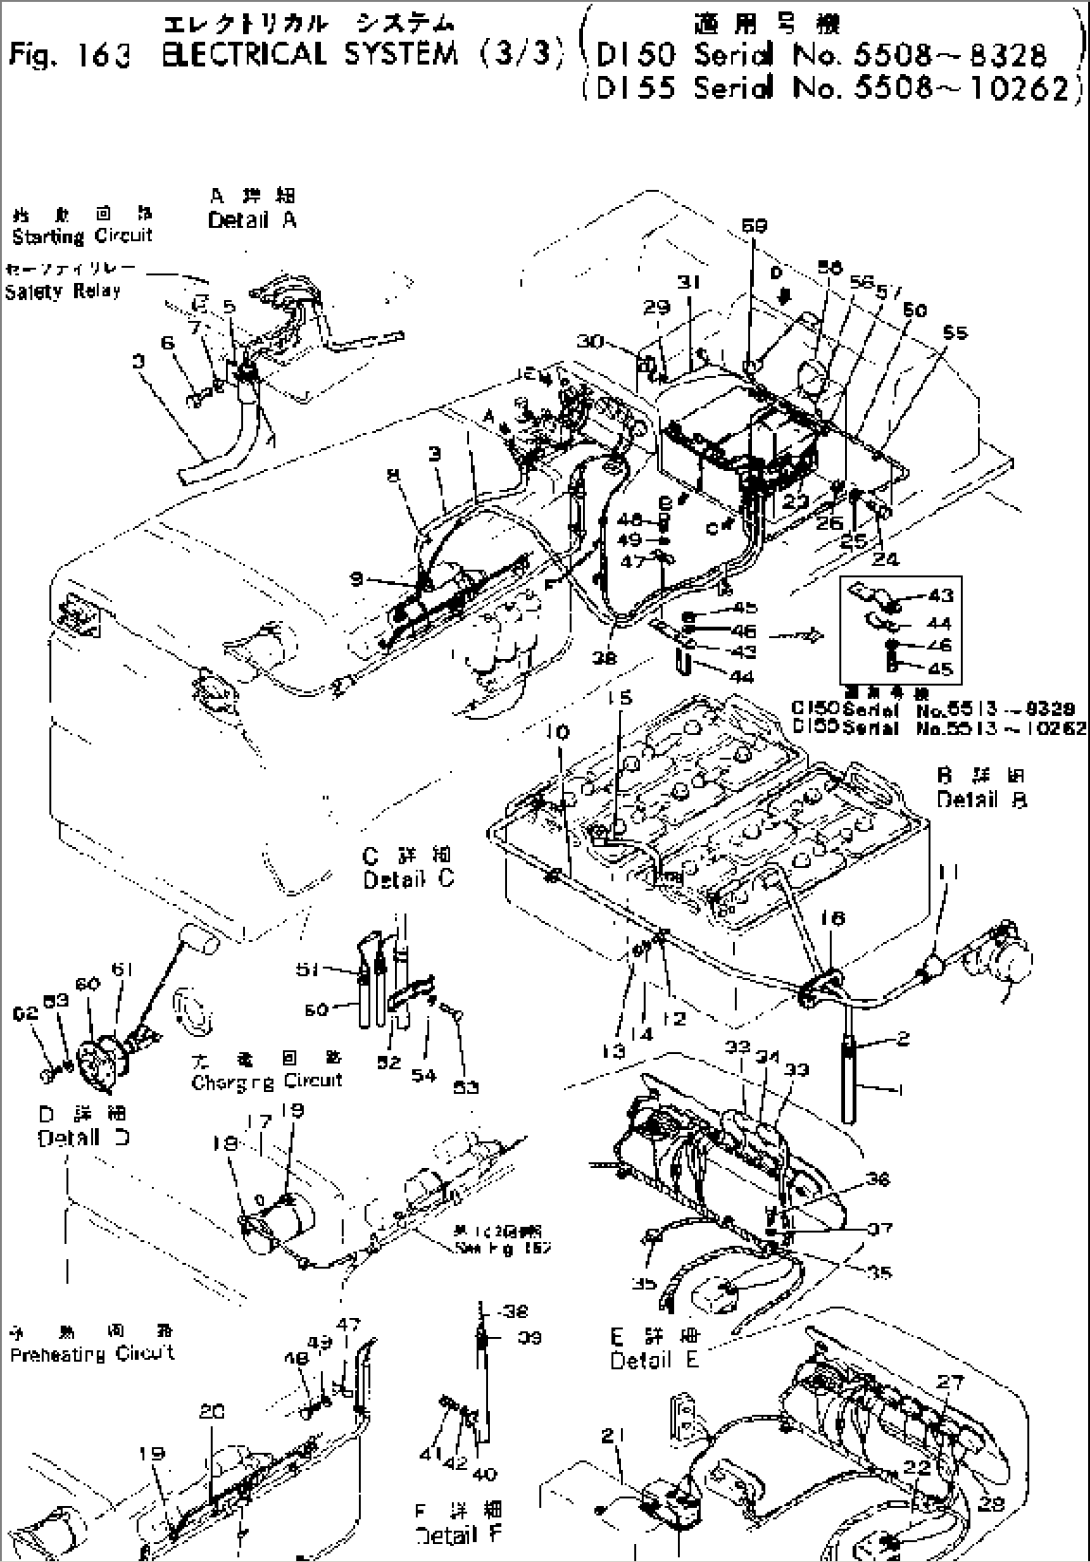 ELECTRICAL SYSTEM (3/3)(#5508-8328)